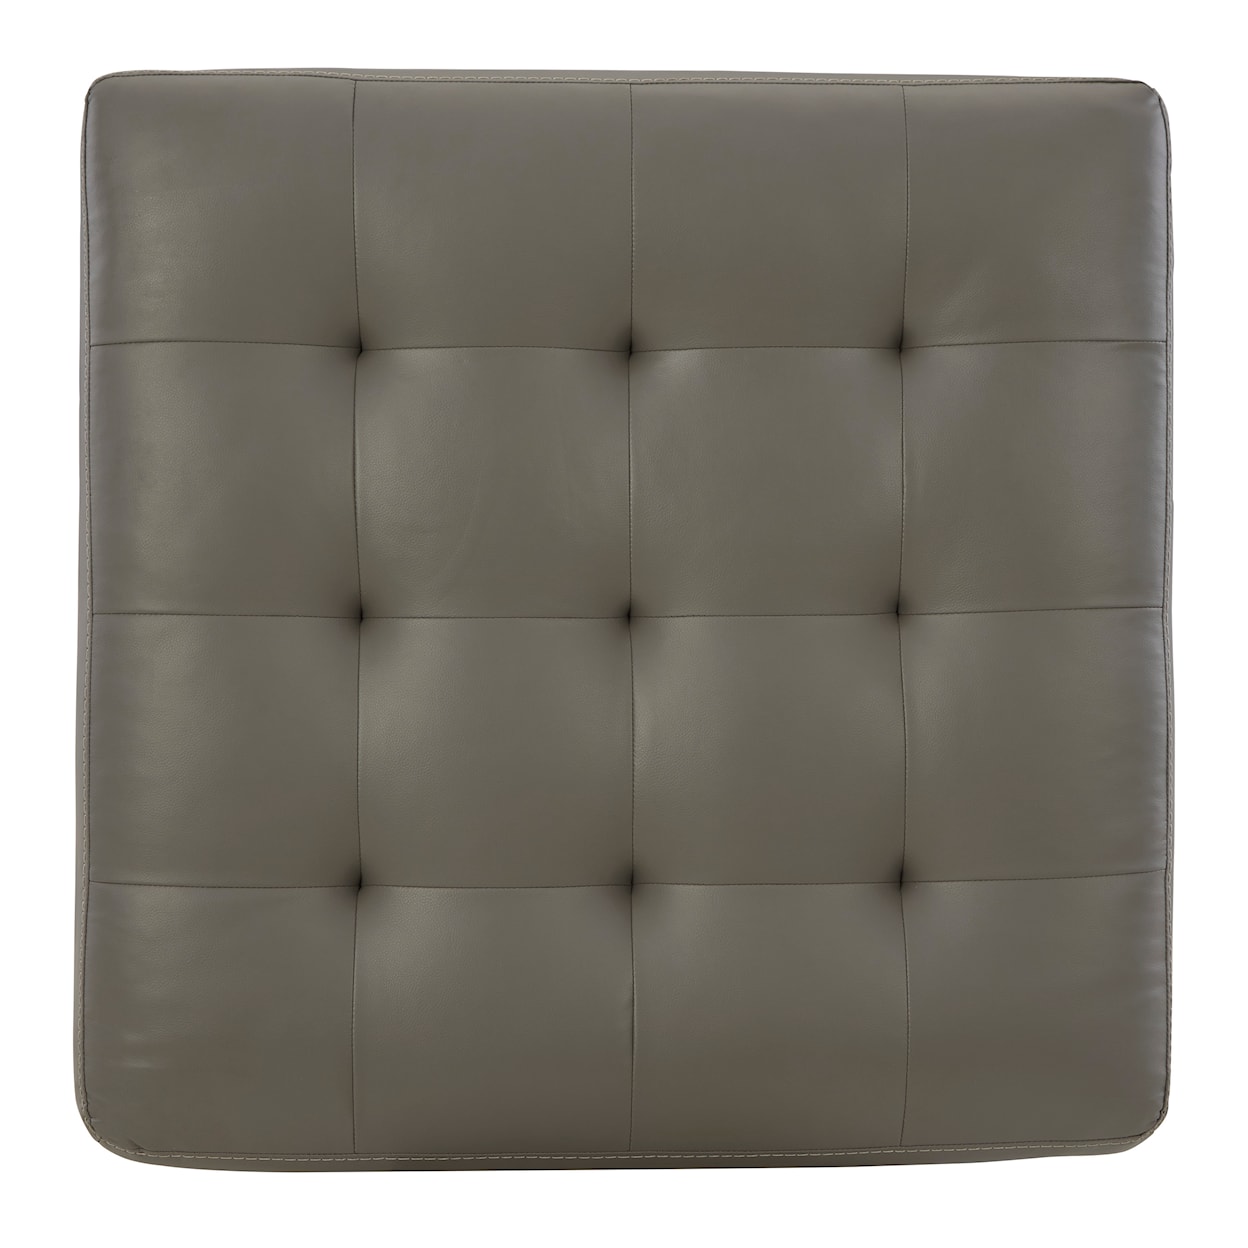 Signature Design by Ashley Donlen Oversized Accent Ottoman